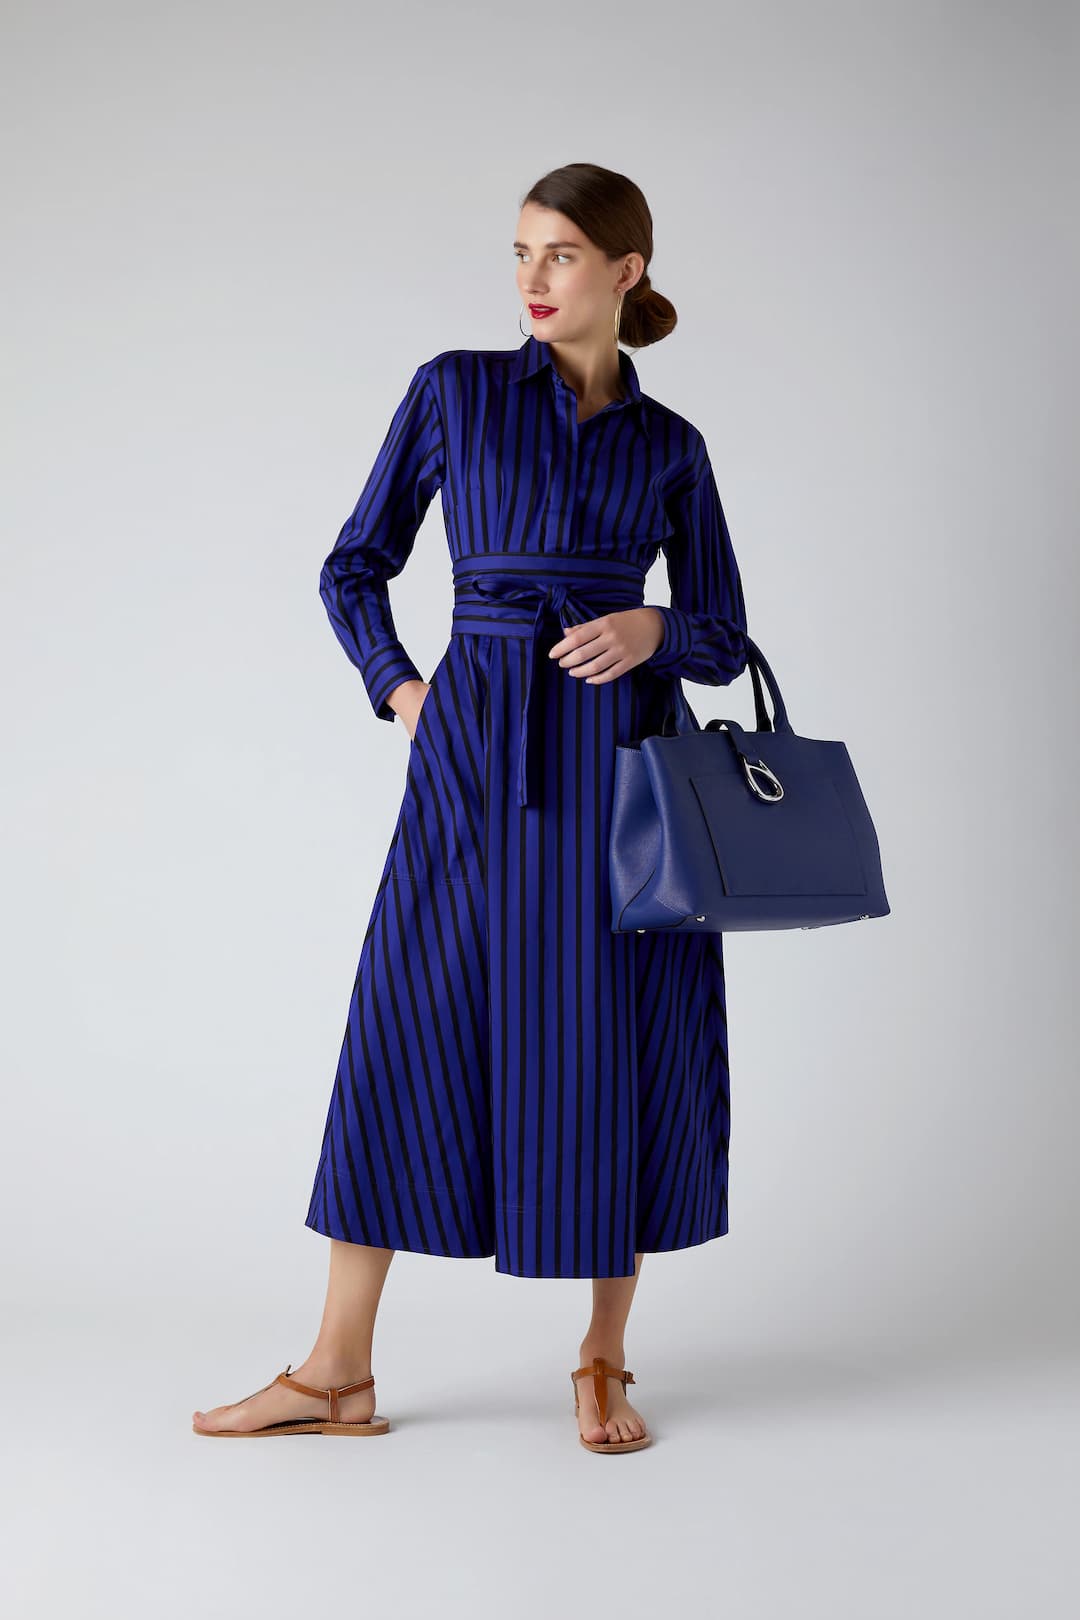 Cobalt Bee leather tote bag paired with the Blue Stripe Bylthe Full Skirt Shirt Dress